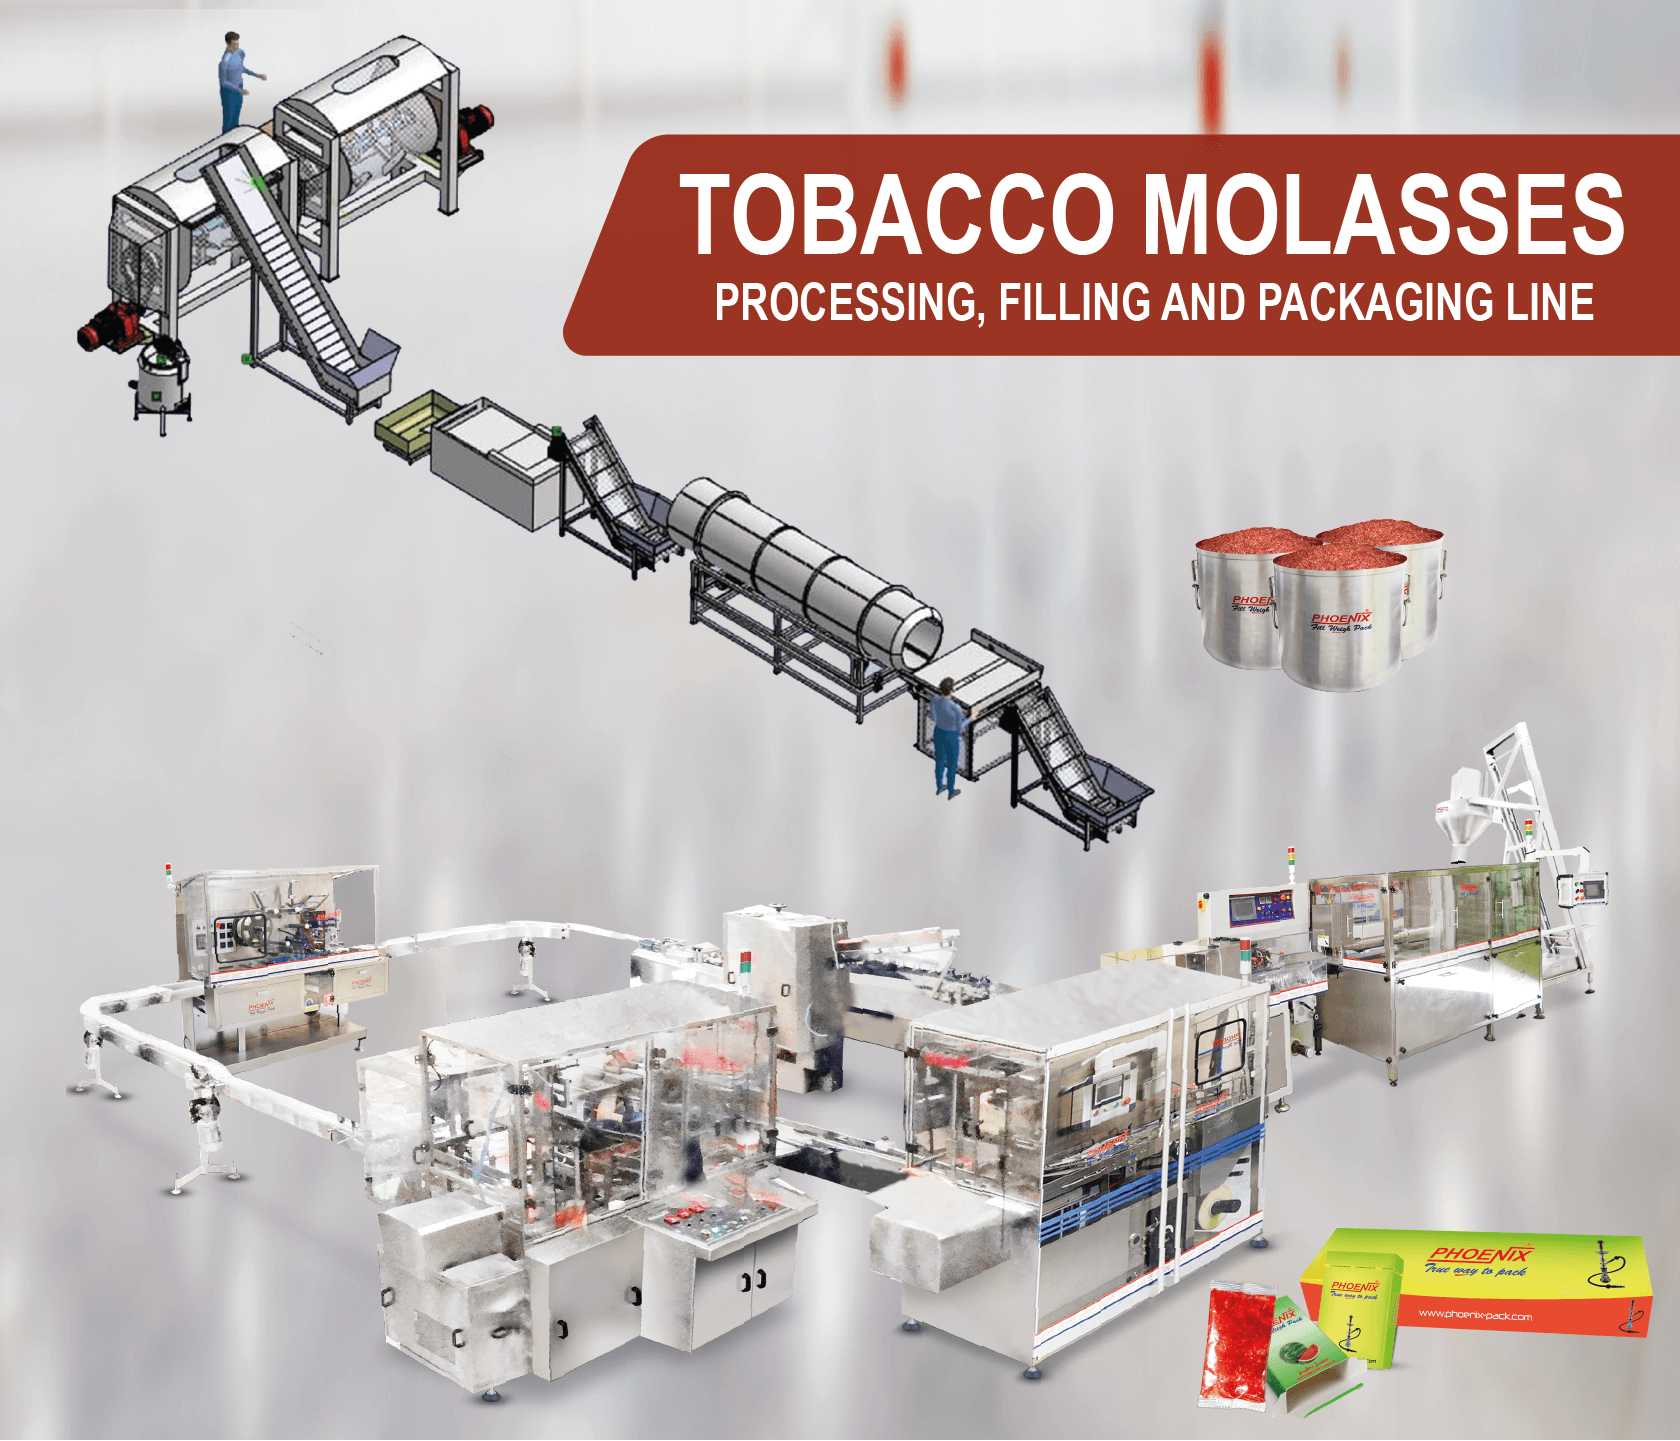 Tobacco Molasses Processing, Filling and Packaging Line